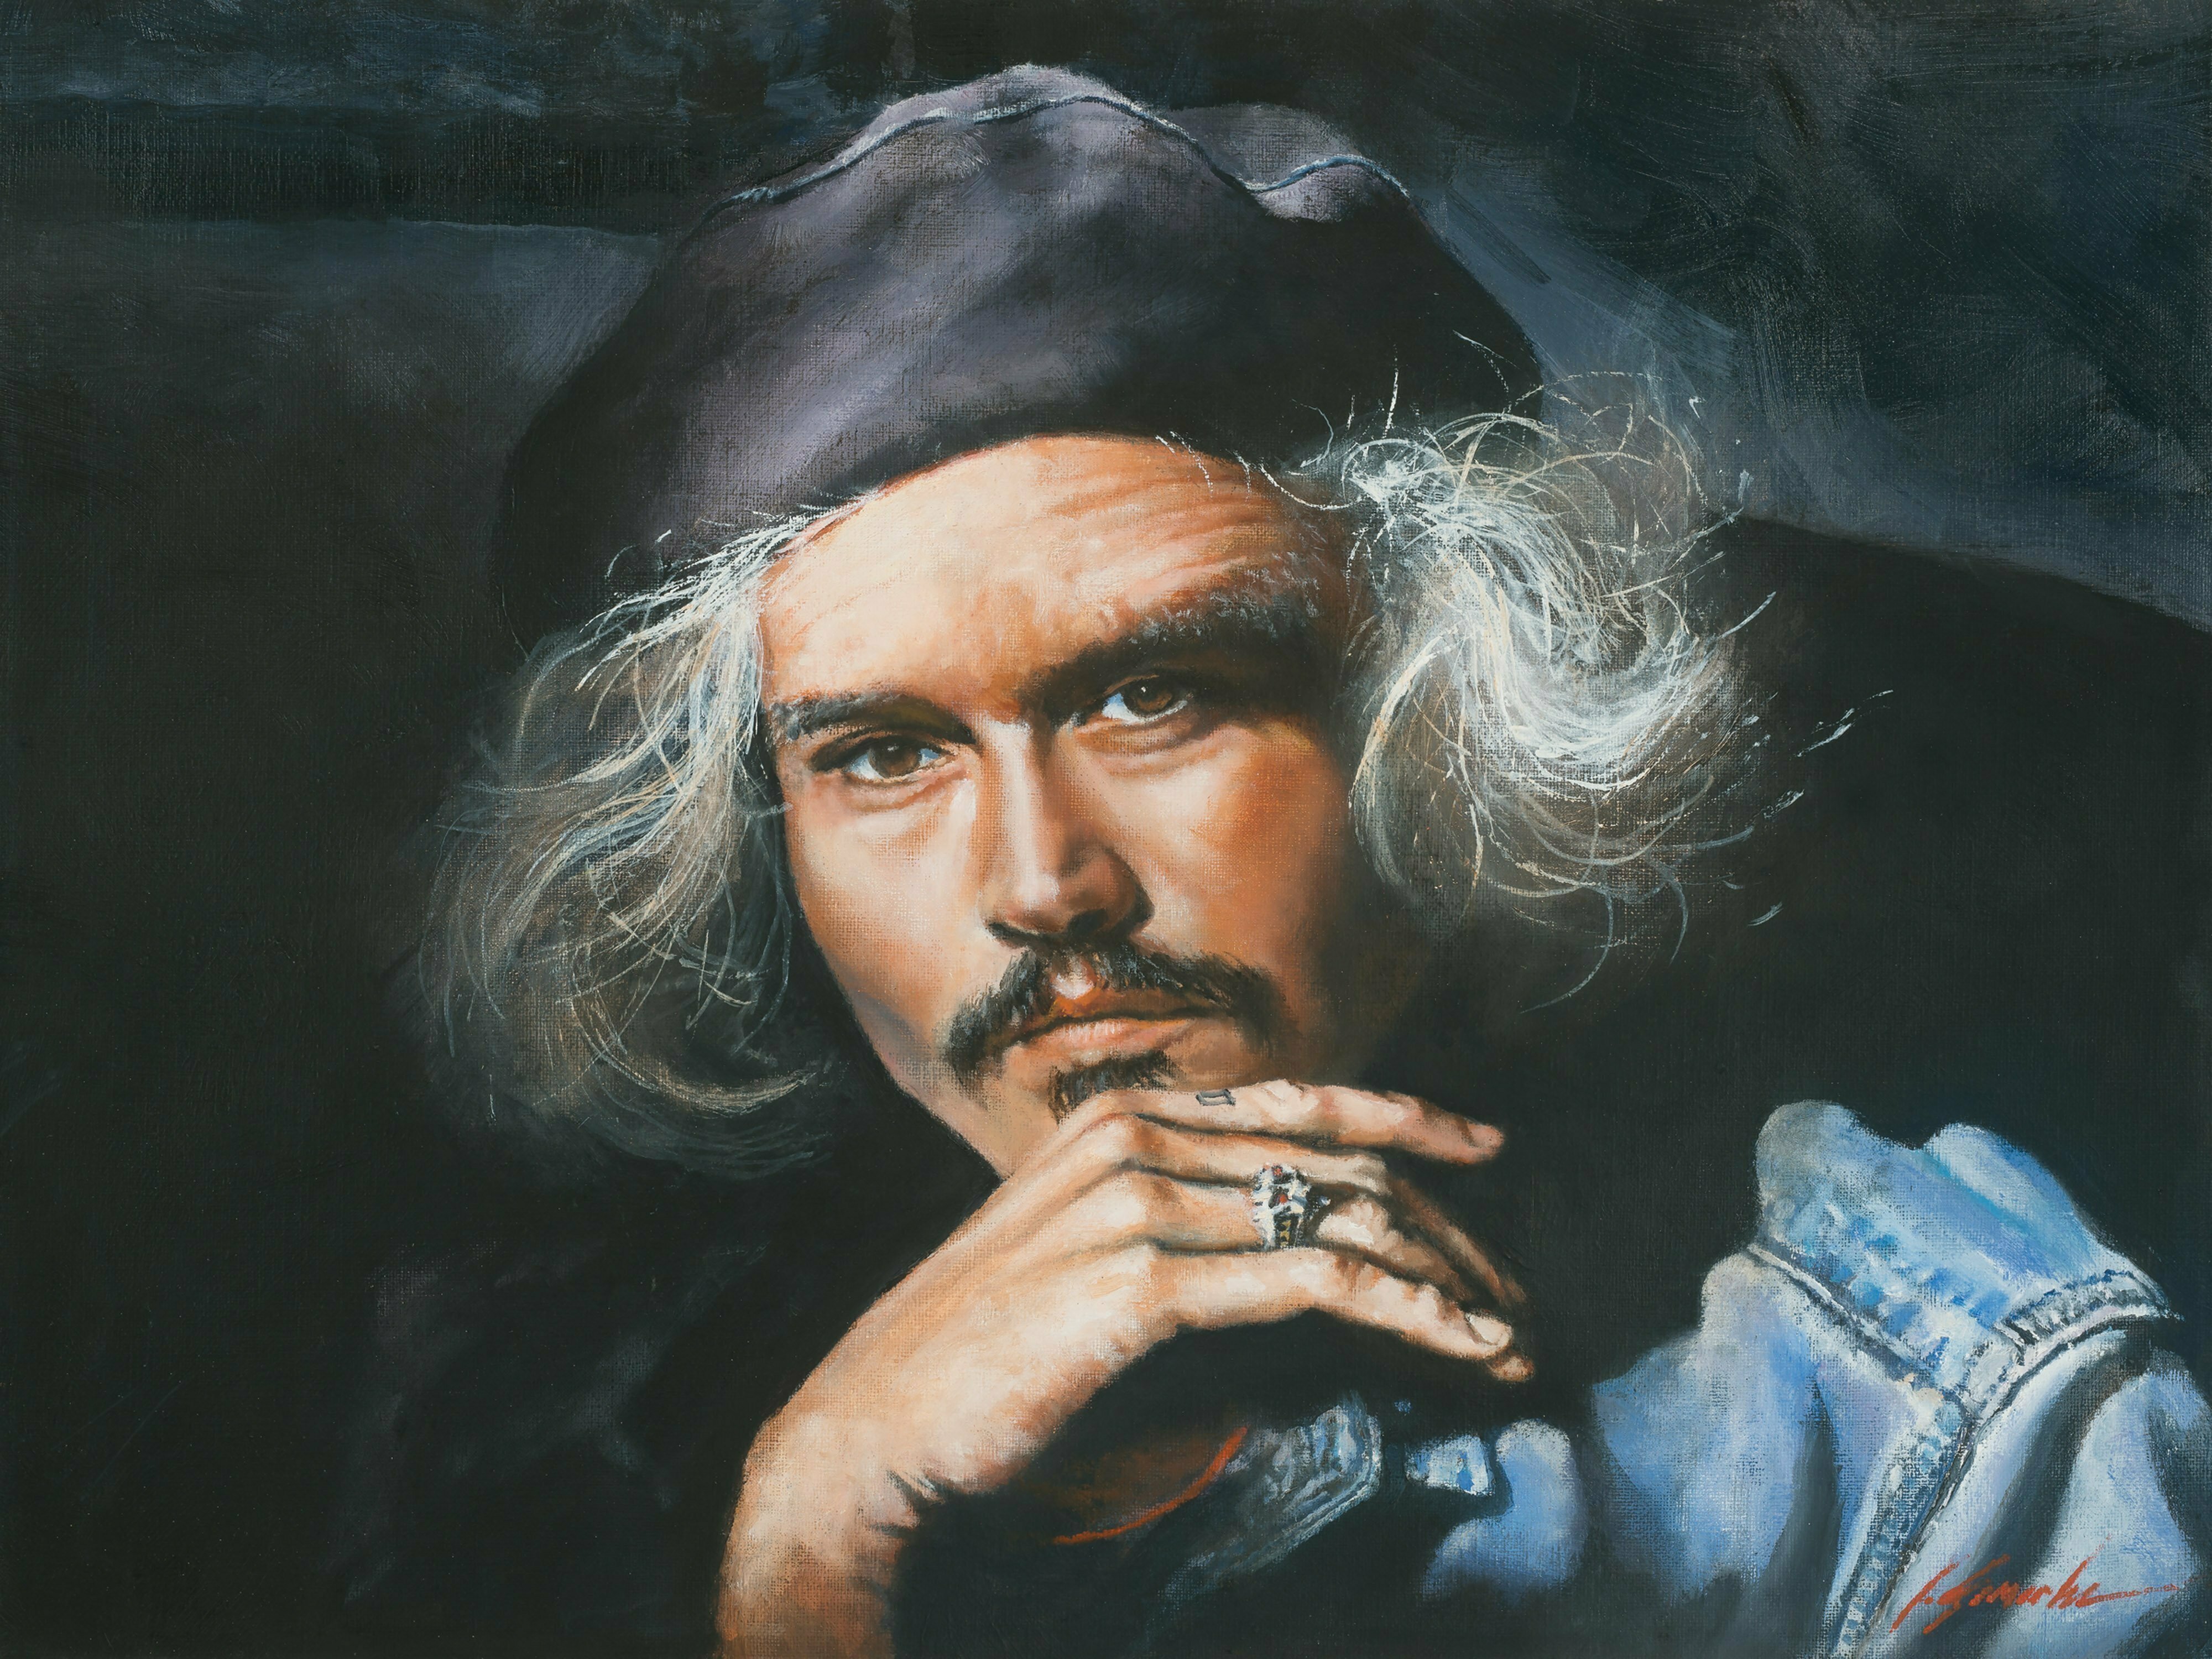 John Gamache, 'The Artist', 2016, original Painting Oil, 24 x 18  inches. Artwork description: 2703 Oil on Linen 18 x 24 Portrait of Johnny Depp as an the artist that he is - Looking Bohemian French or Dutch contemplating his next work. ...